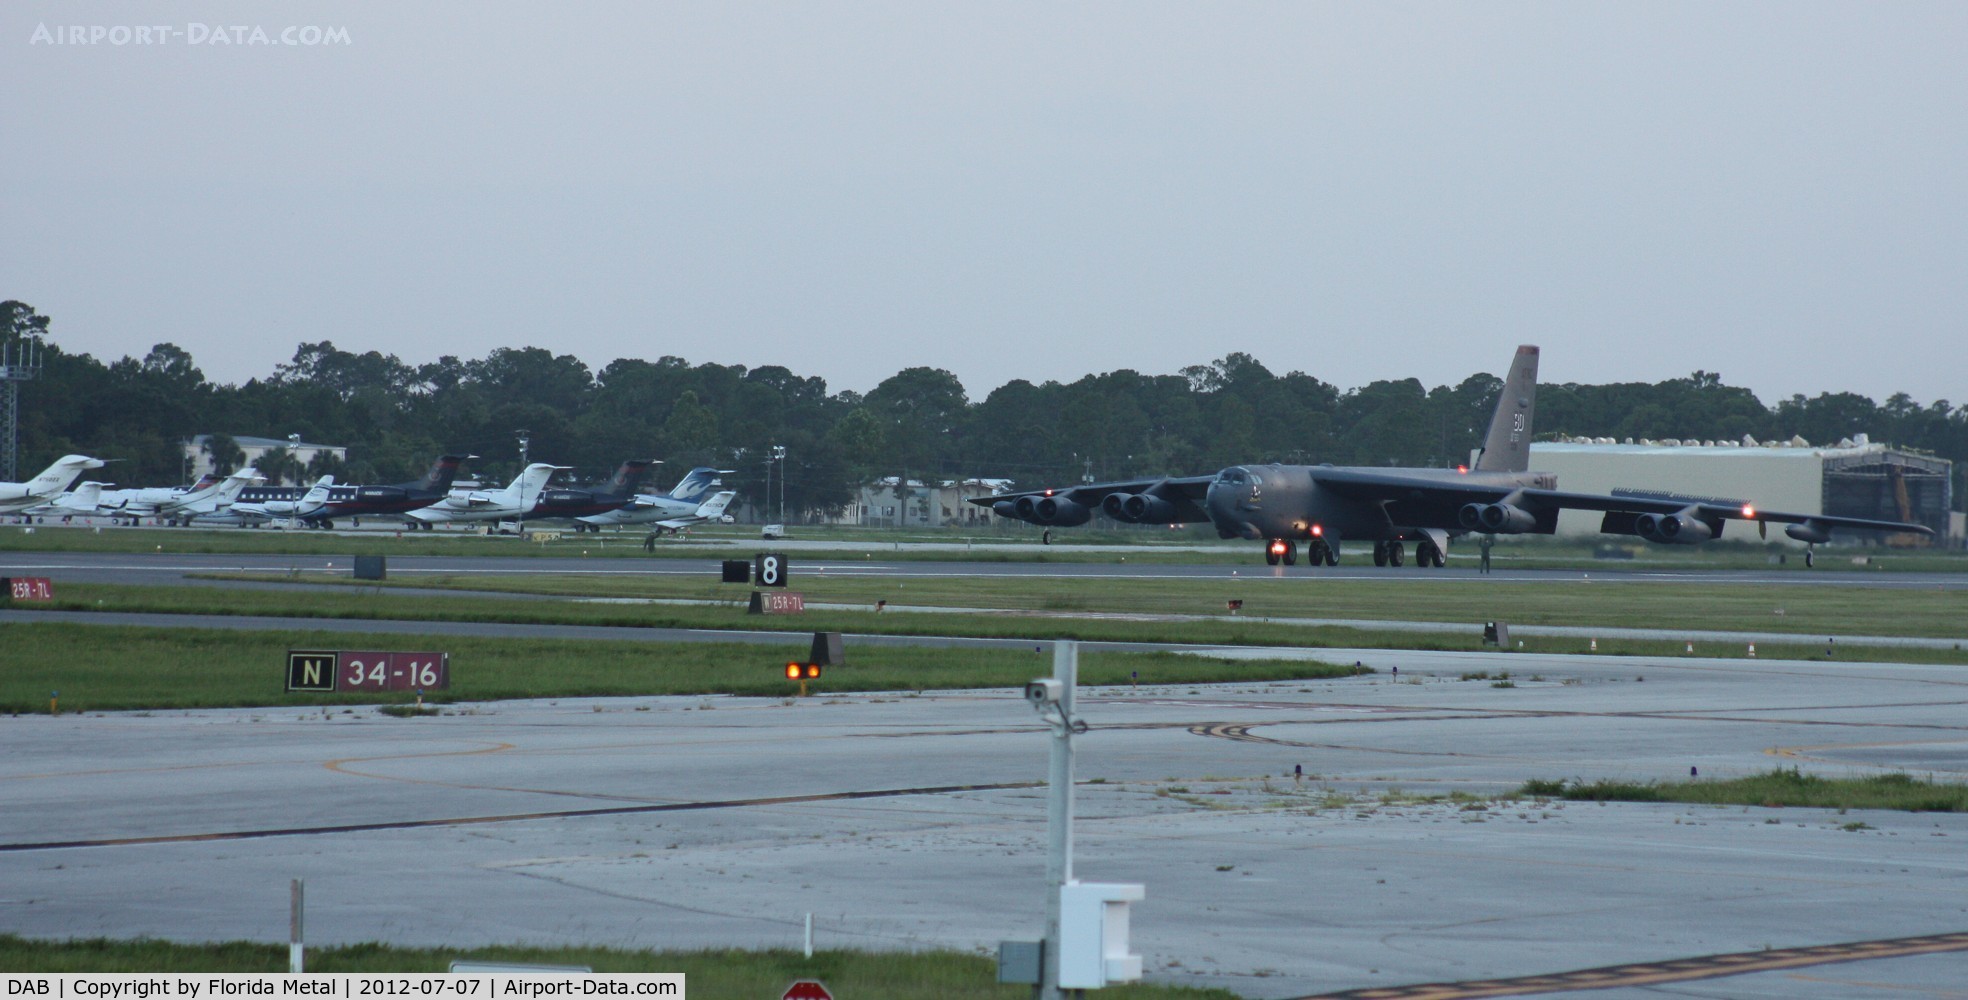 Daytona Beach International Airport (DAB) - B-52 just landed on Rwy 7L, a couple crew members guiding it to back taxi